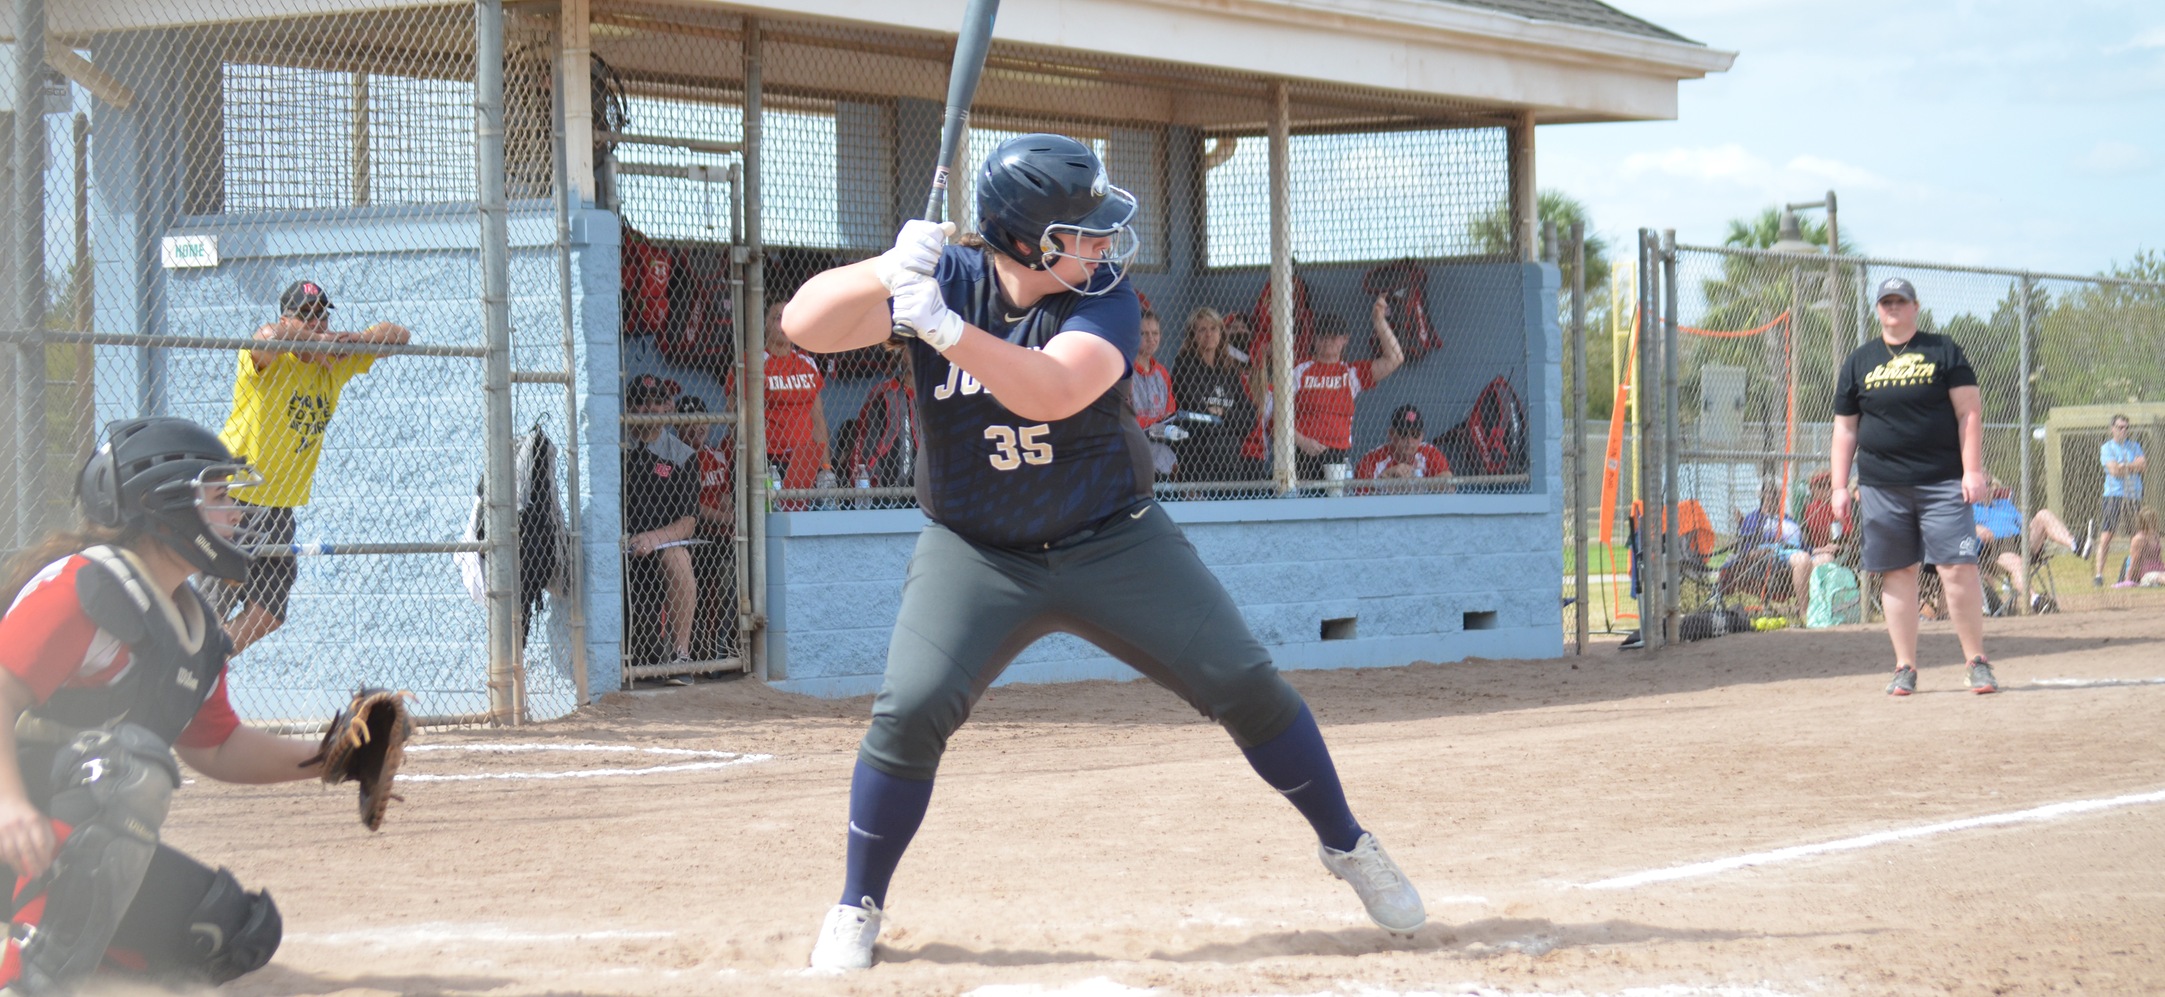 Catherine Miller went 1-1, with an RBI and a home run as the Eagles fell to Olivet.